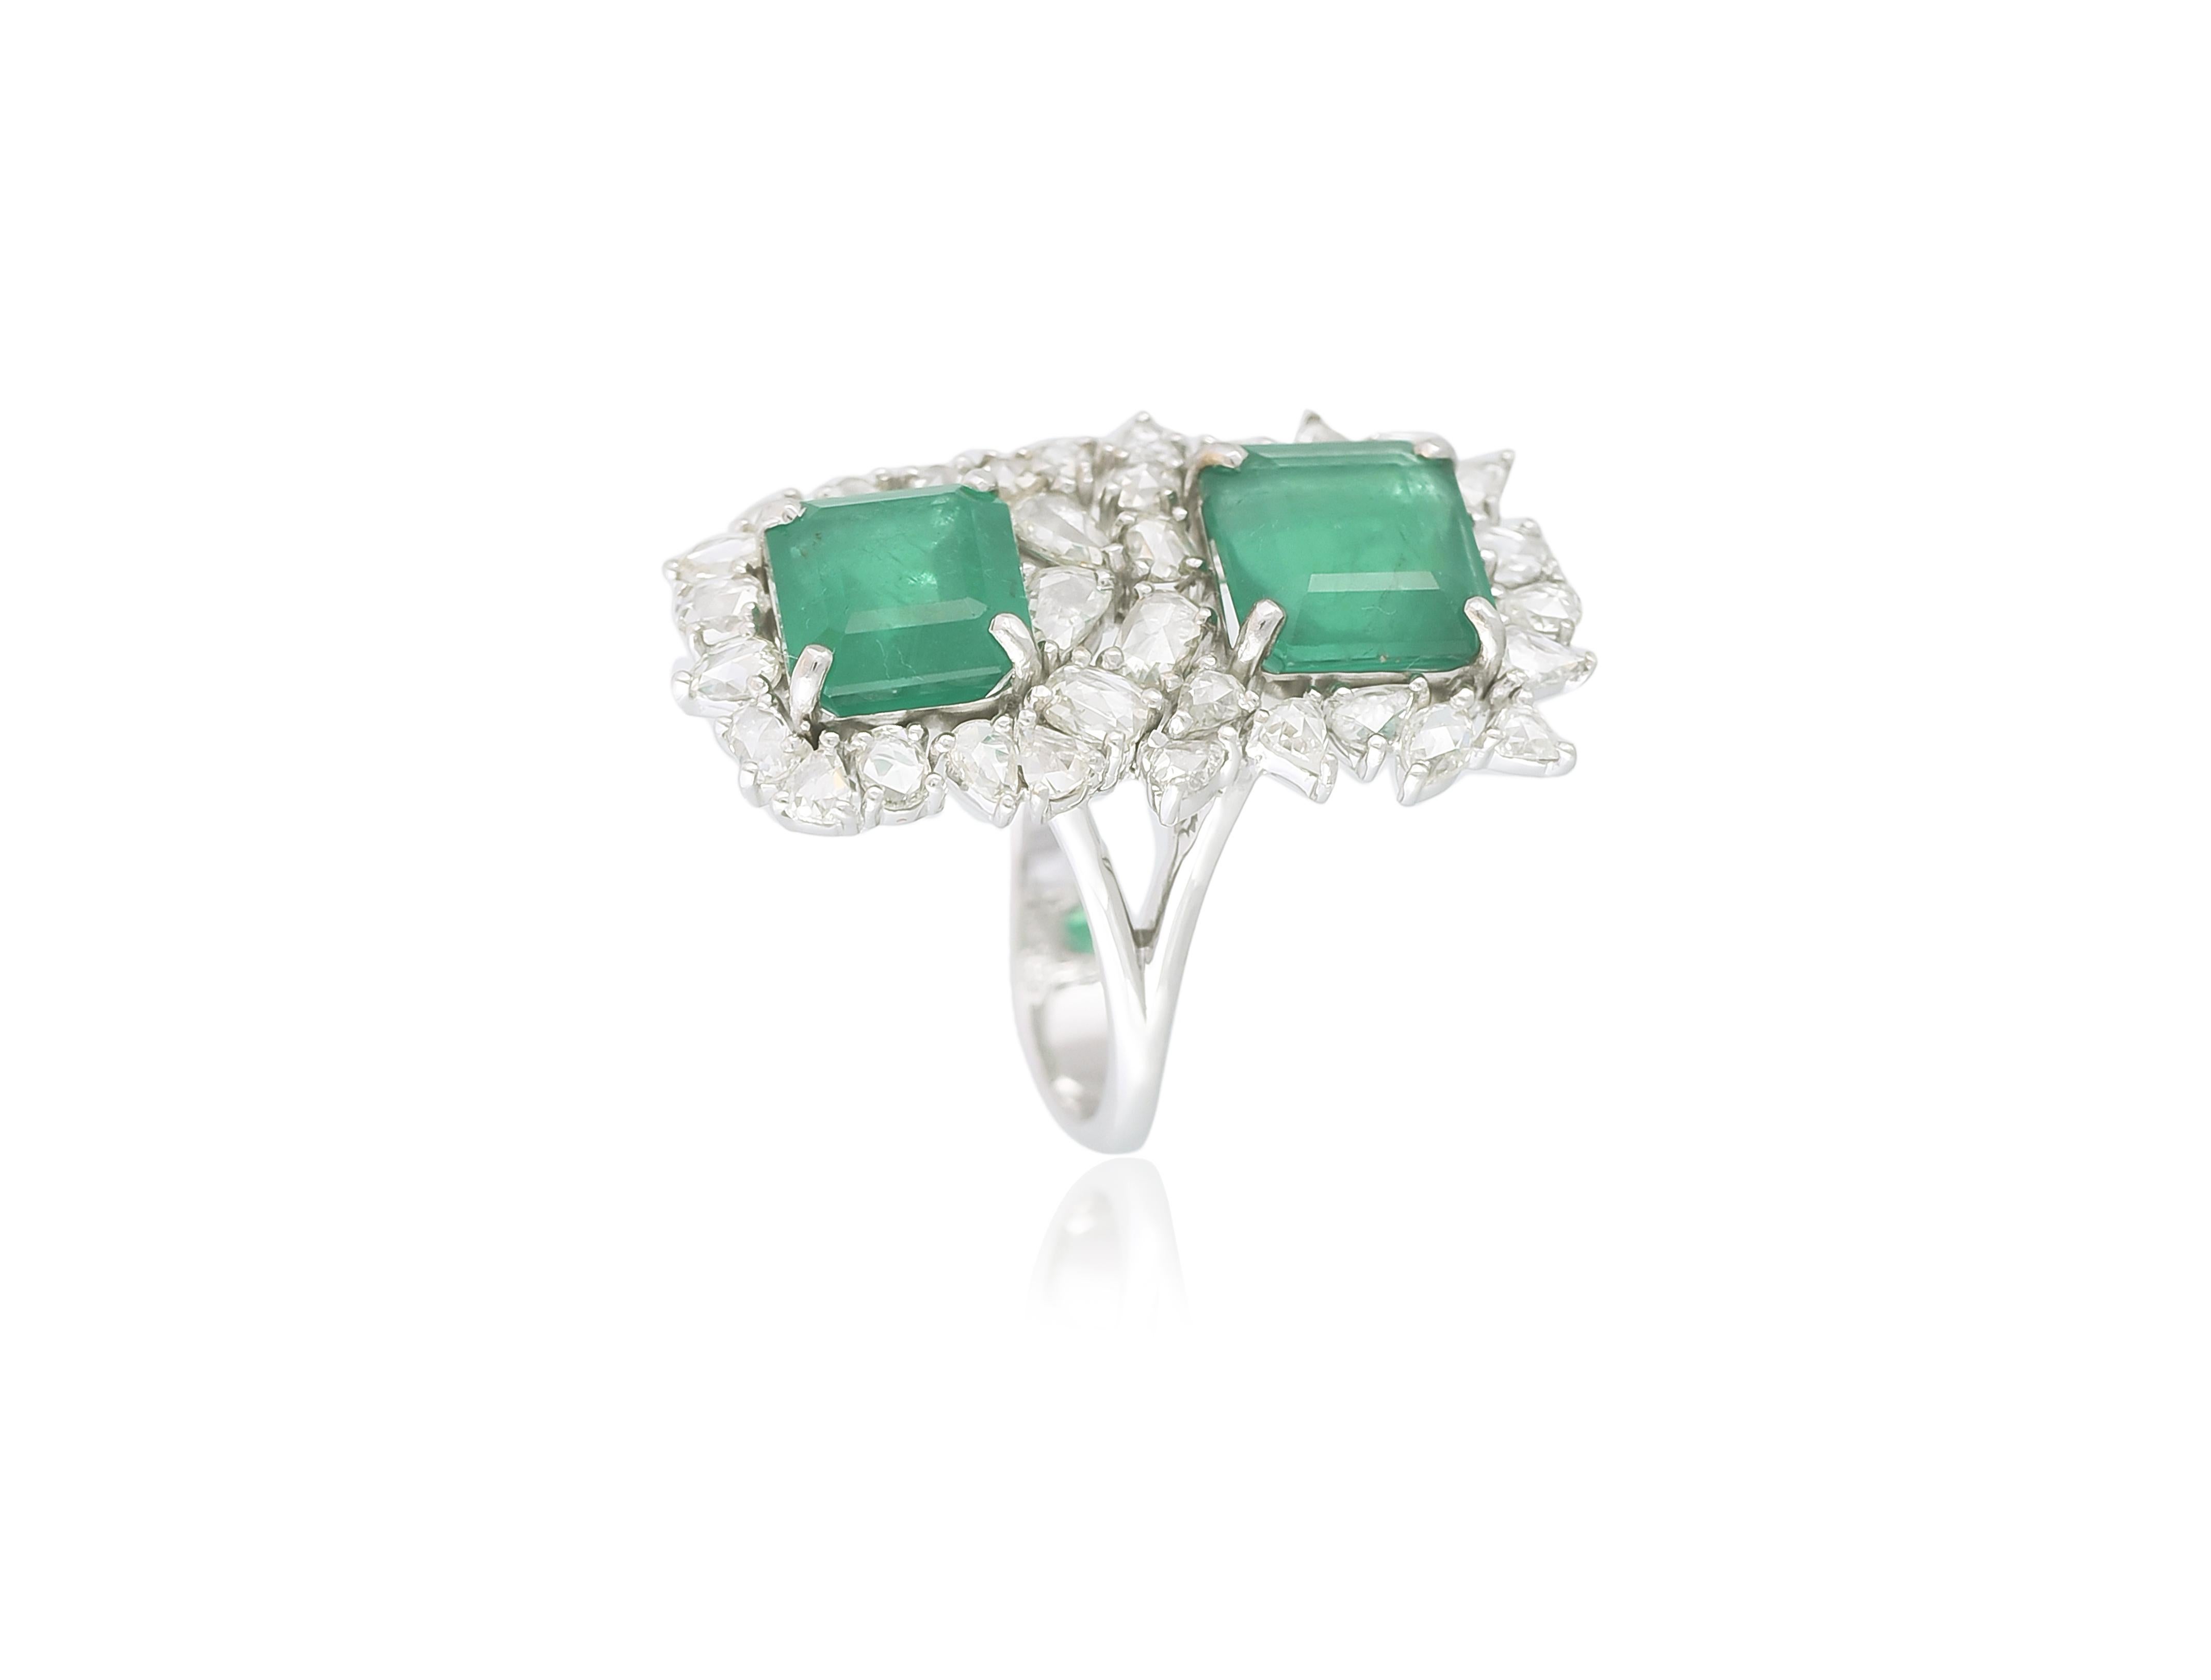 A very chic piece of cocktail ring set with Zambian Emeralds & Rose Cut Diamonds set in 18K Gold. The Emeralds are natural, without any treatment and of Zambian origin. The total weight of the Emeralds is 6.83 carats. The weight of the Rose Cut